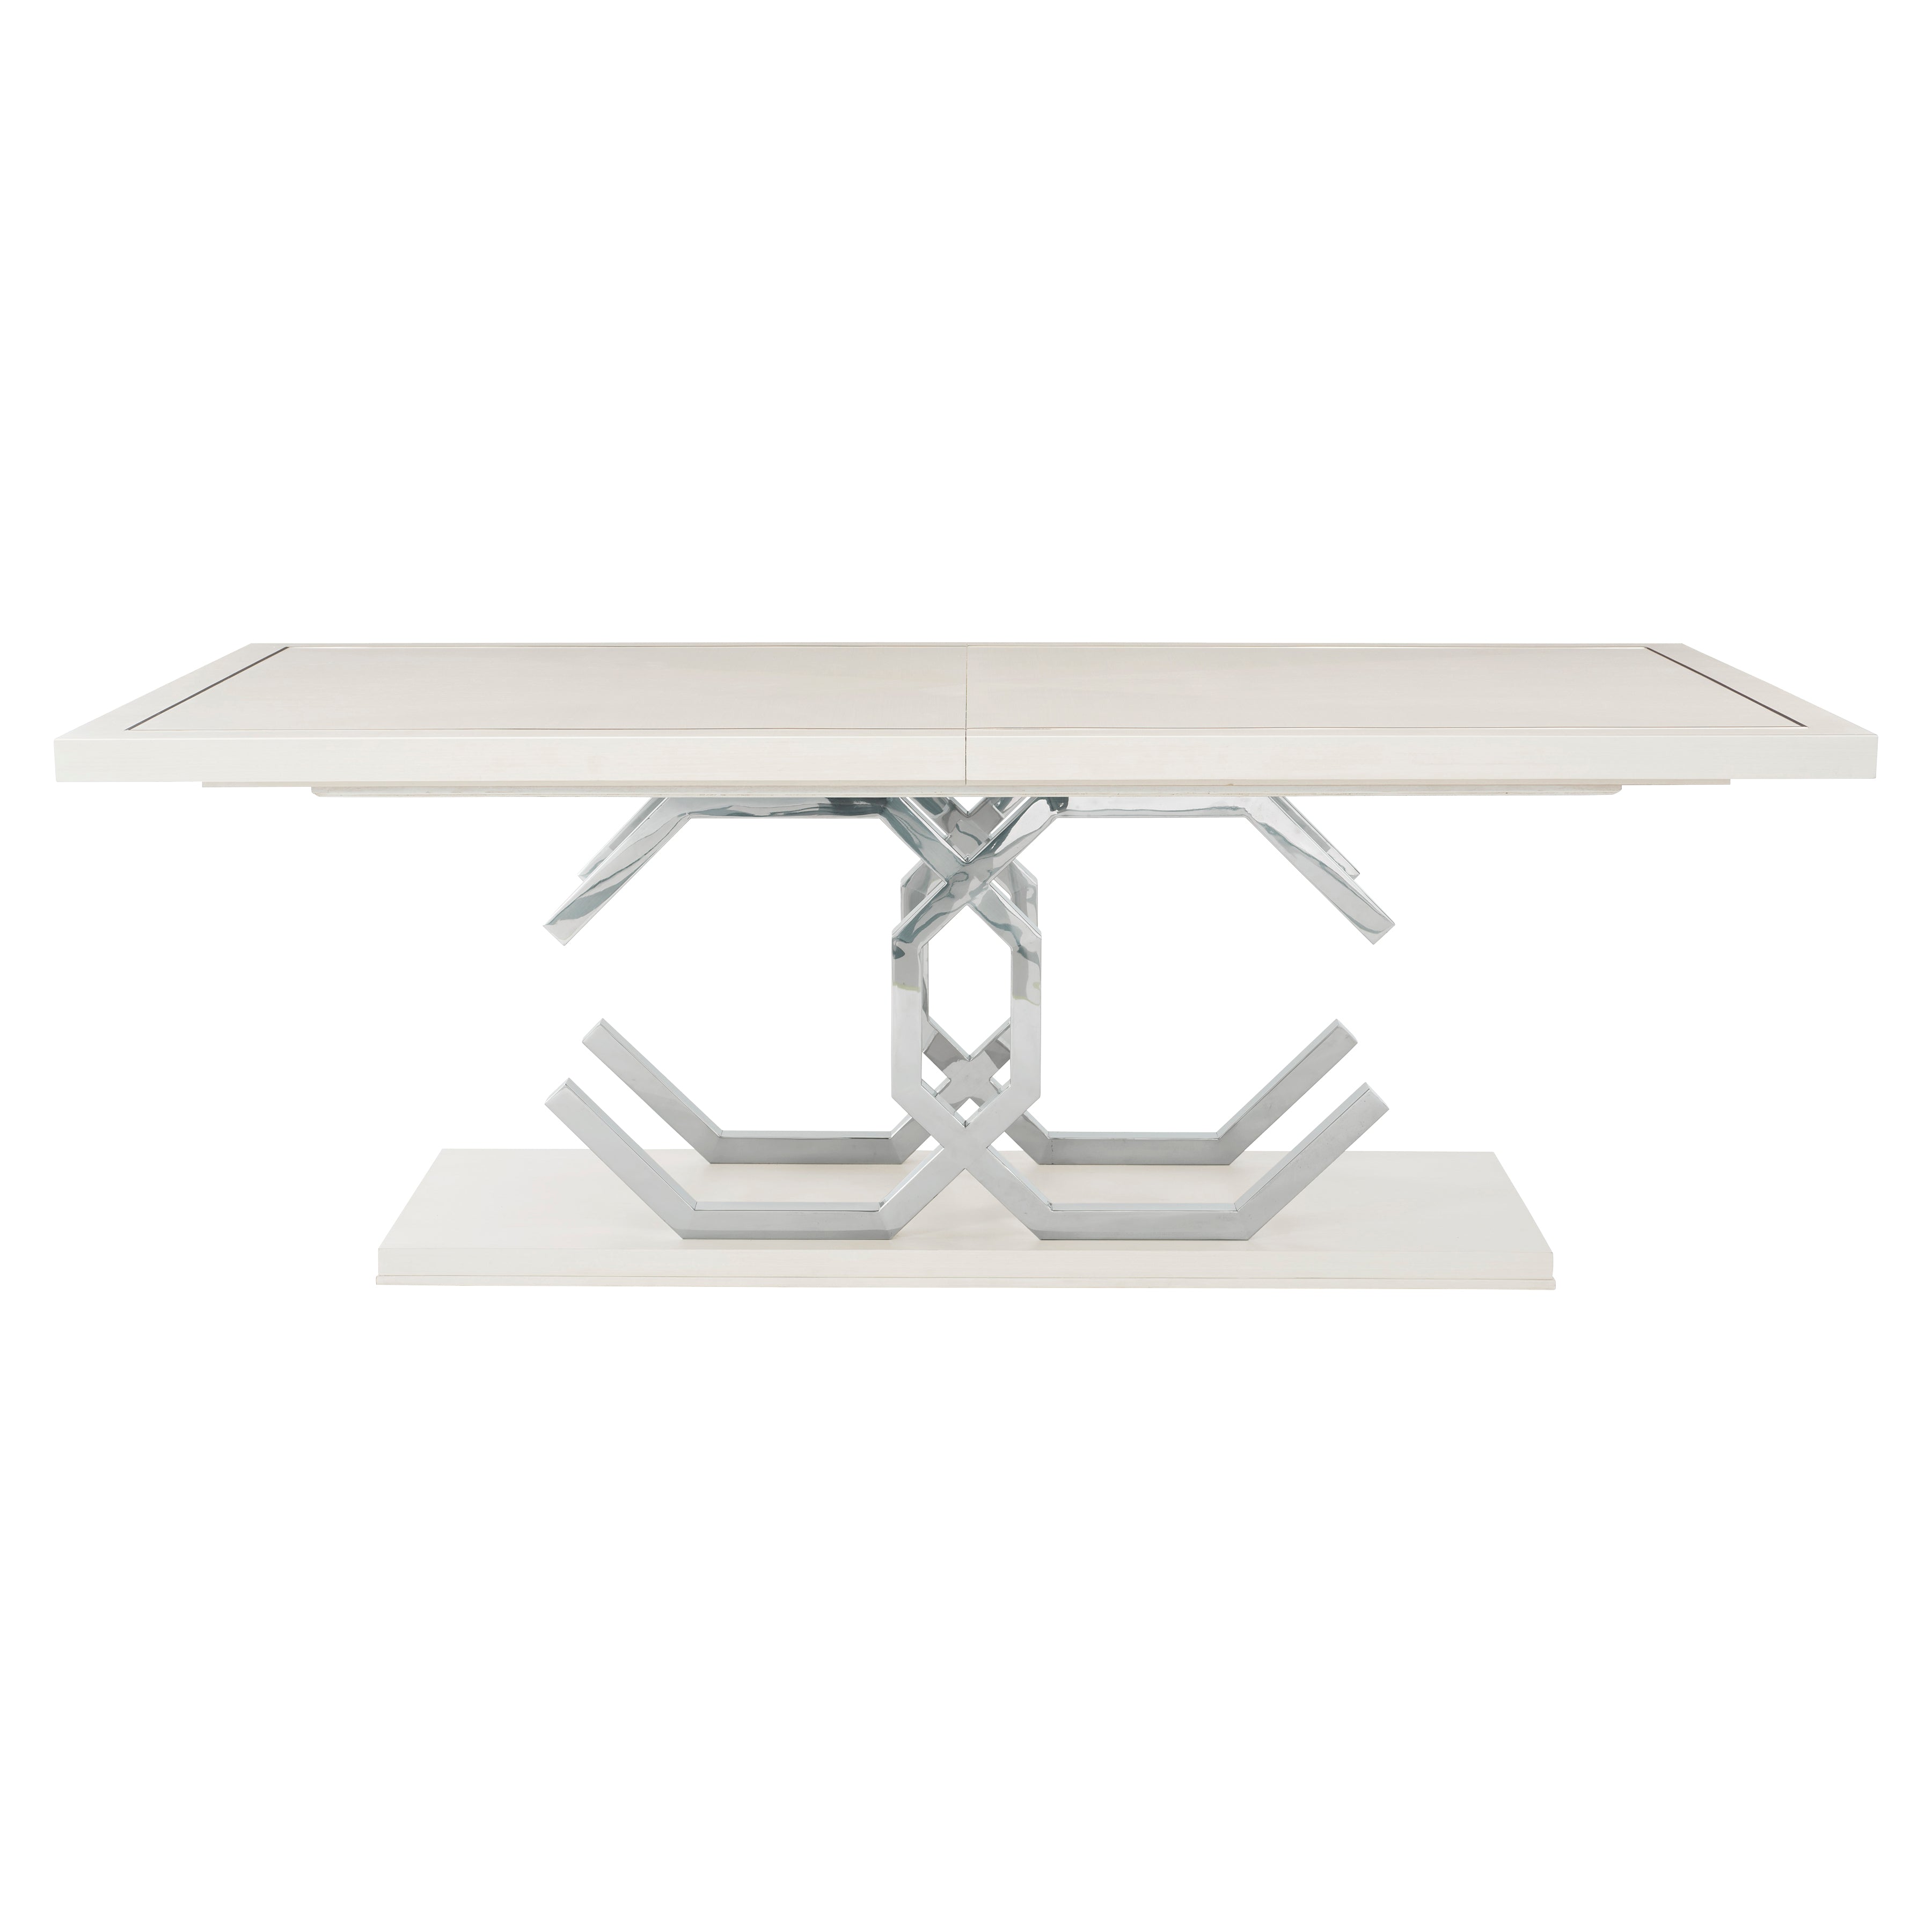 Silhouette Rectangular Dining Table